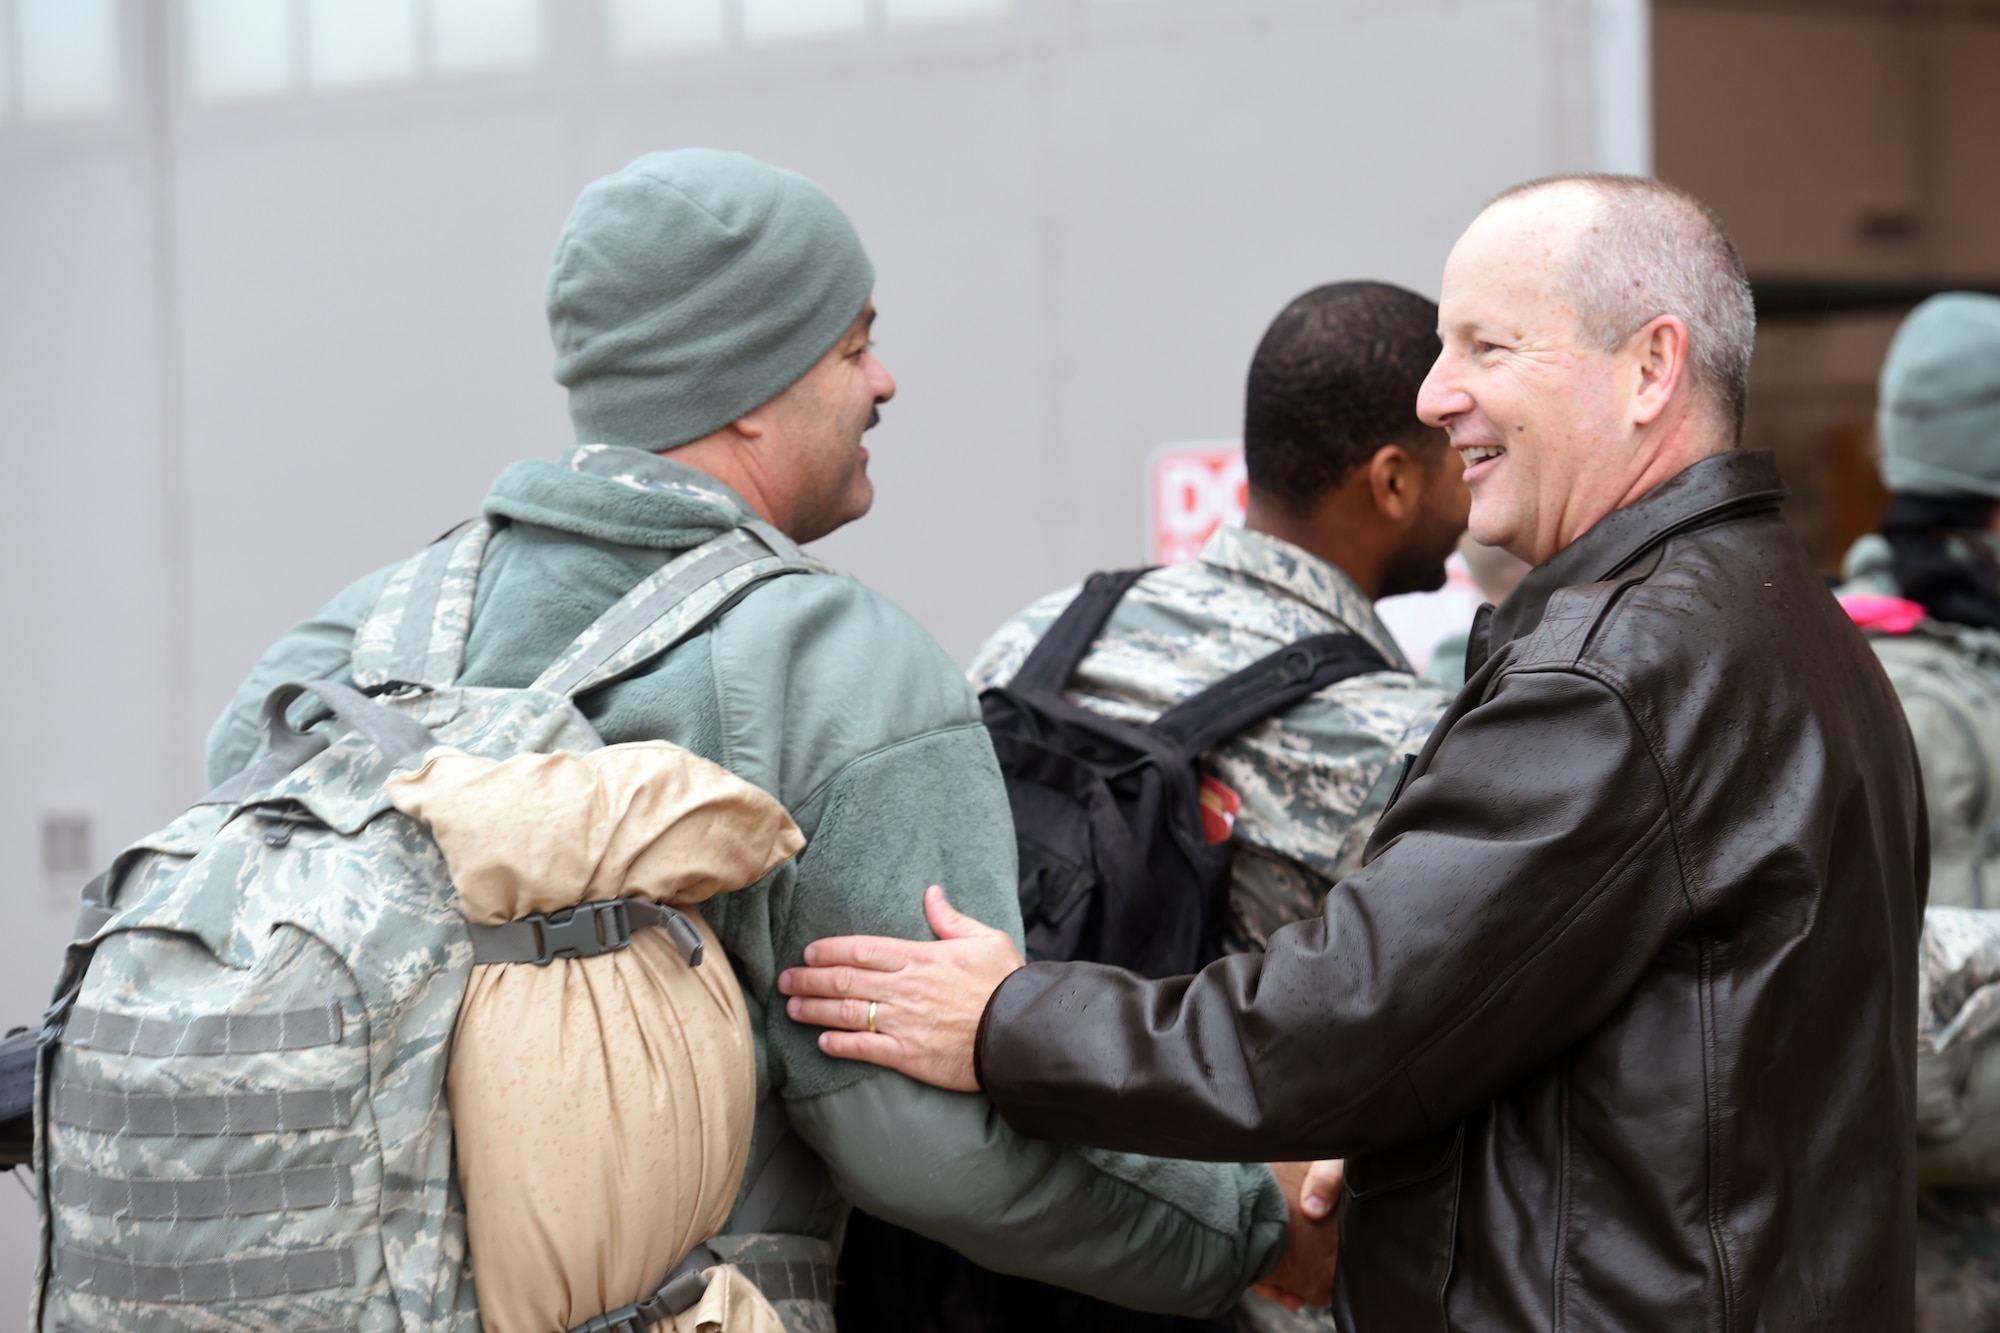 151024-Z-EZ686-196 -- Brig. Gen. John D. Slocum, commander of the 127th Wing at Selfridge, welcomes home hundreds of Airmen from the 127th Wing, Selfridge Air National Guard Base, Mich., on October 24, 2015 after a six month to Southwest Asia in support of U.S. Central Command's Operation Inherent Resolve.   (U.S. Air National Guard photo by Master Sgt. David Kujawa)